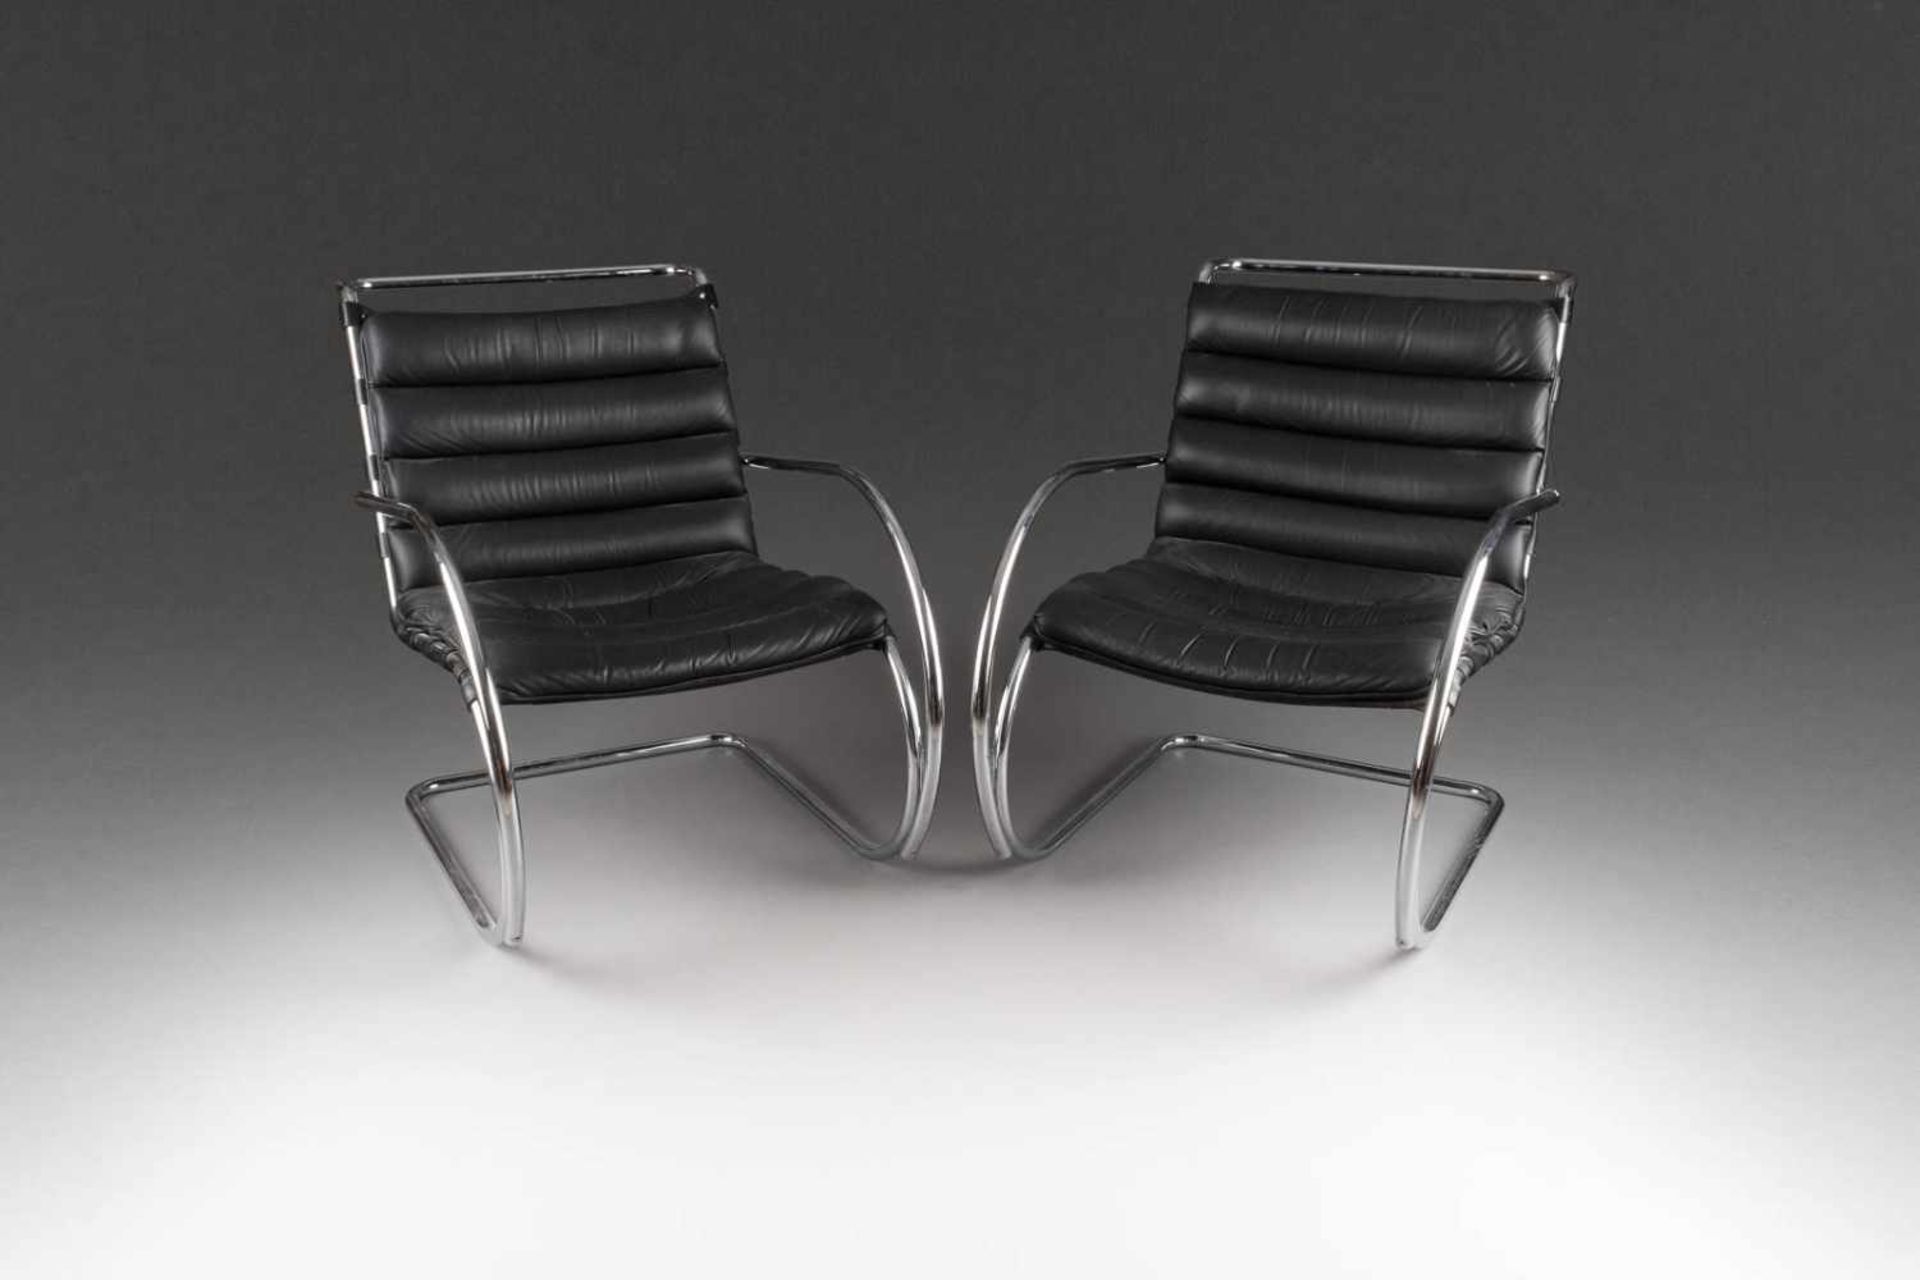 LUDWIG MIES VAN DER ROHE (AFTER)1886 Aachen - 1969 Chicago TWO CANTILEVER CHAIRS German, 2nd half of